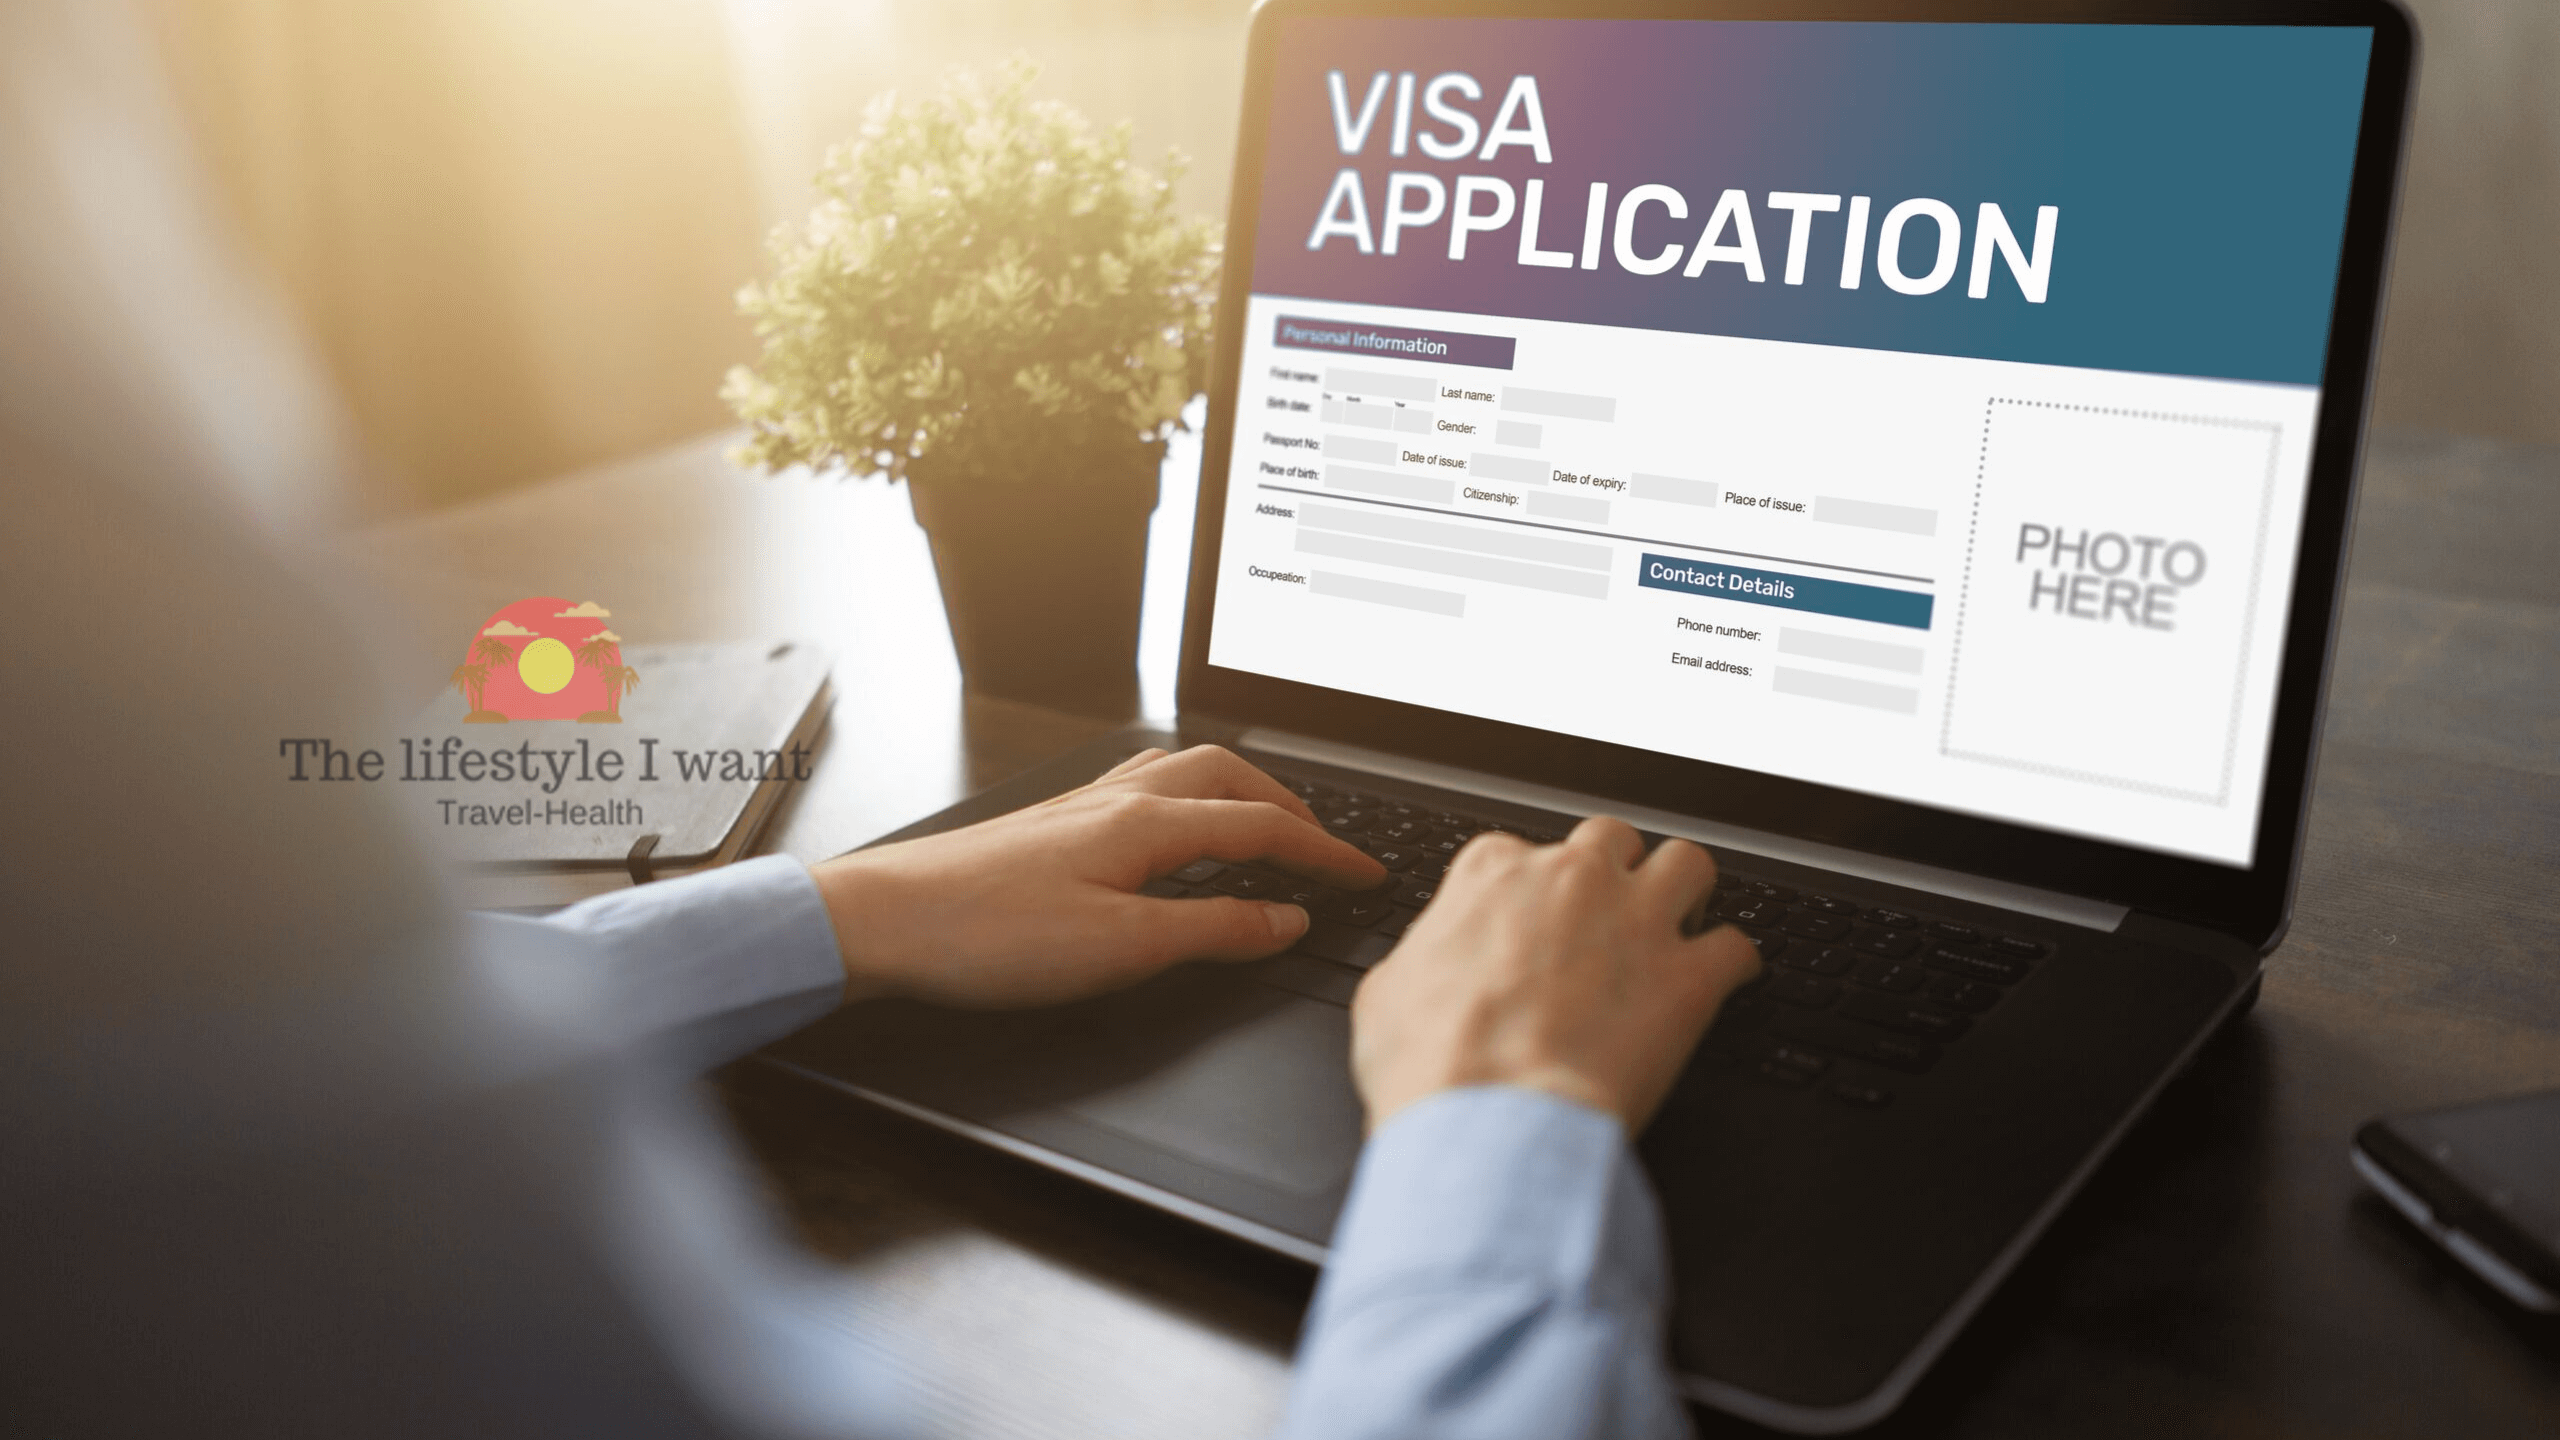 Guide on how to get visas for beginners